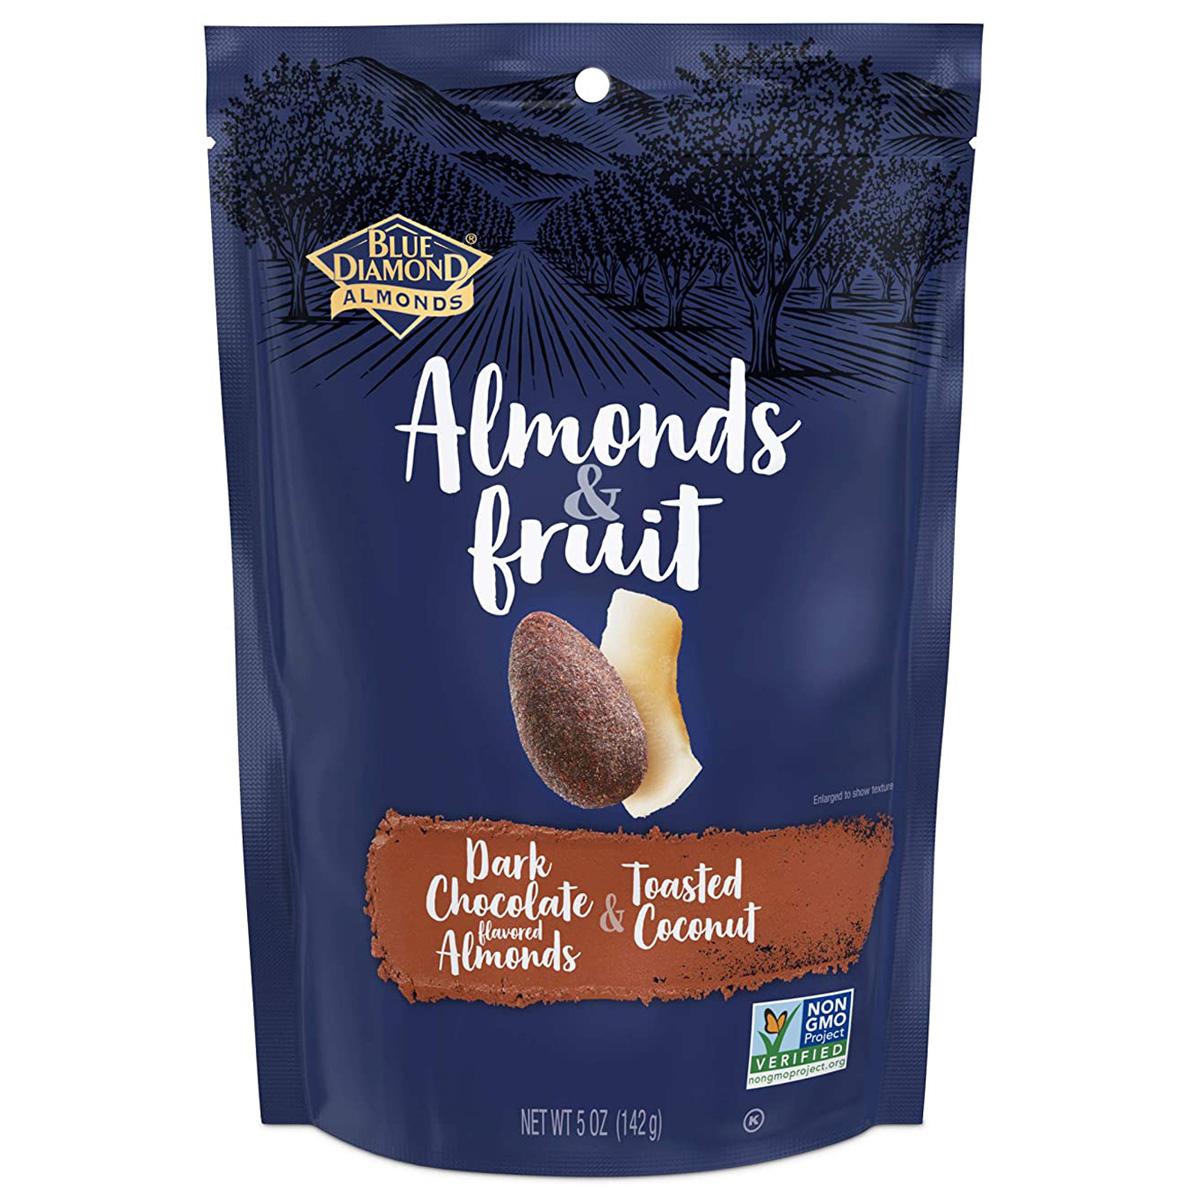 10oz Blue Diamond Dark Chocolate Almonds and Toasted Coconut for $4.49 Shipped